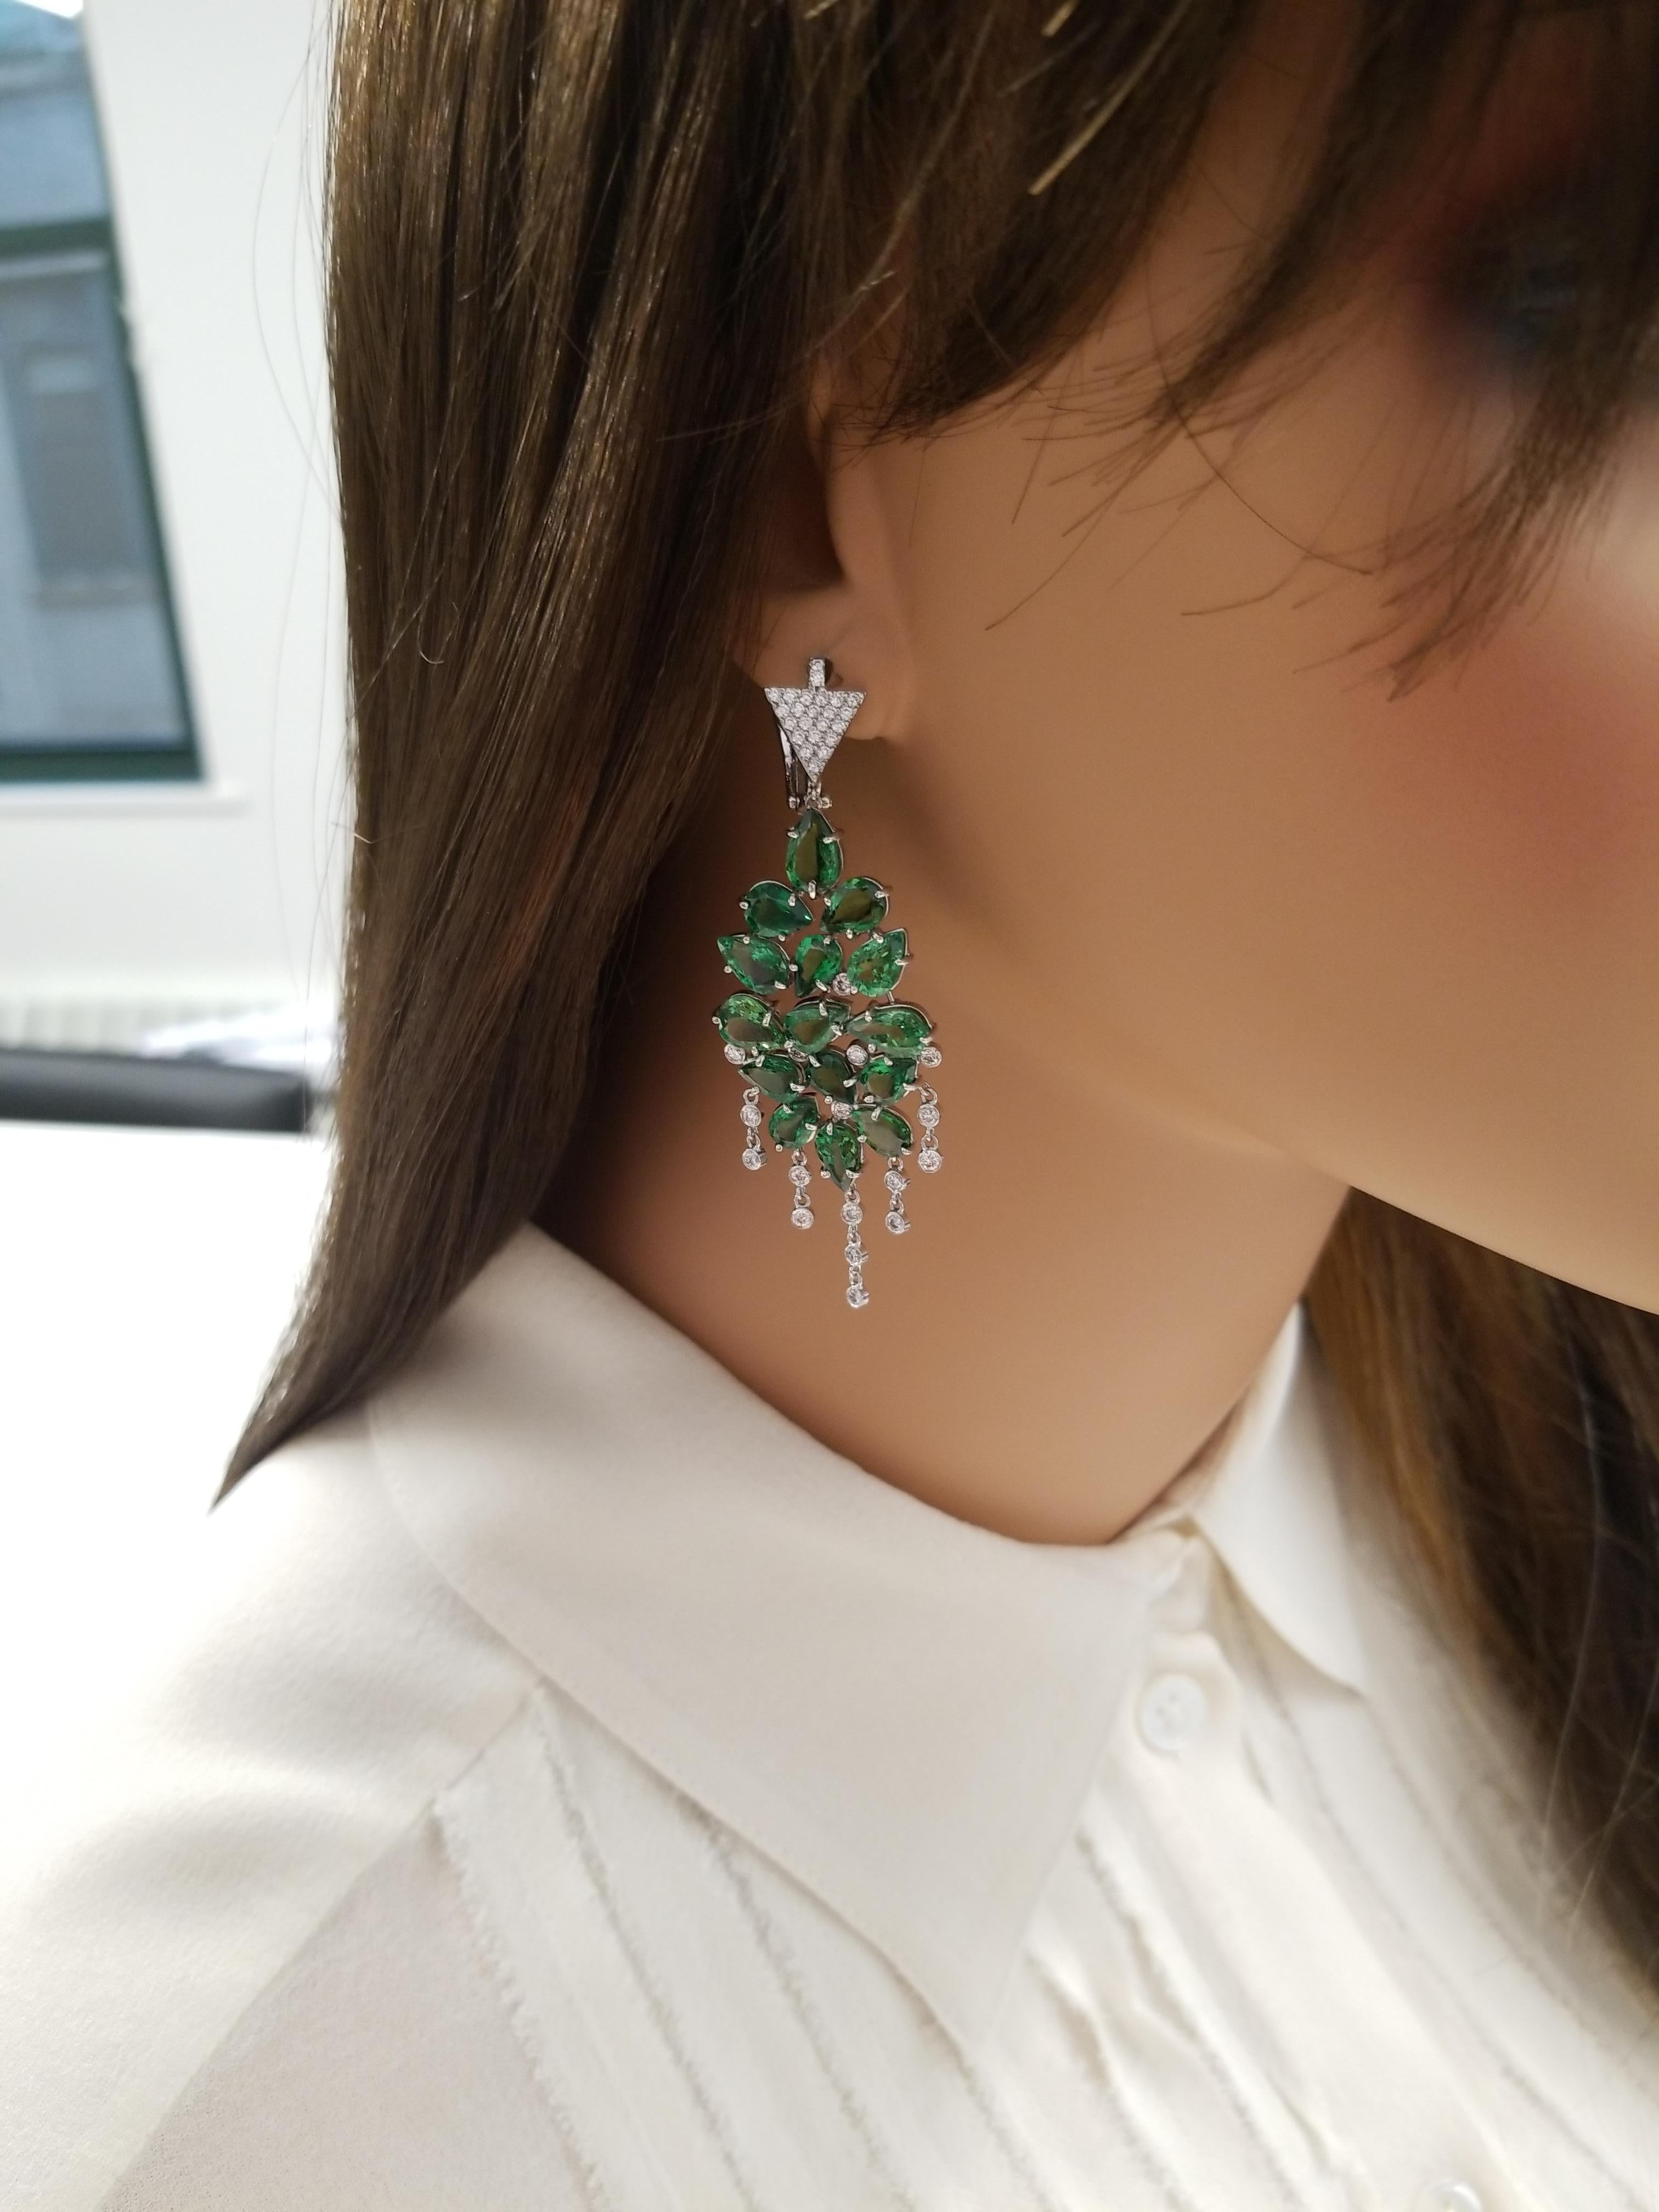 30 pear-shaped vibrant tsavorite garnets adorn these incredible chandelier earrings totaling 21.53 carats in prong settings.  The tsavorite garnets are sourced from Tanzania. The color is intense green; its luster and transparency is excellent. 80